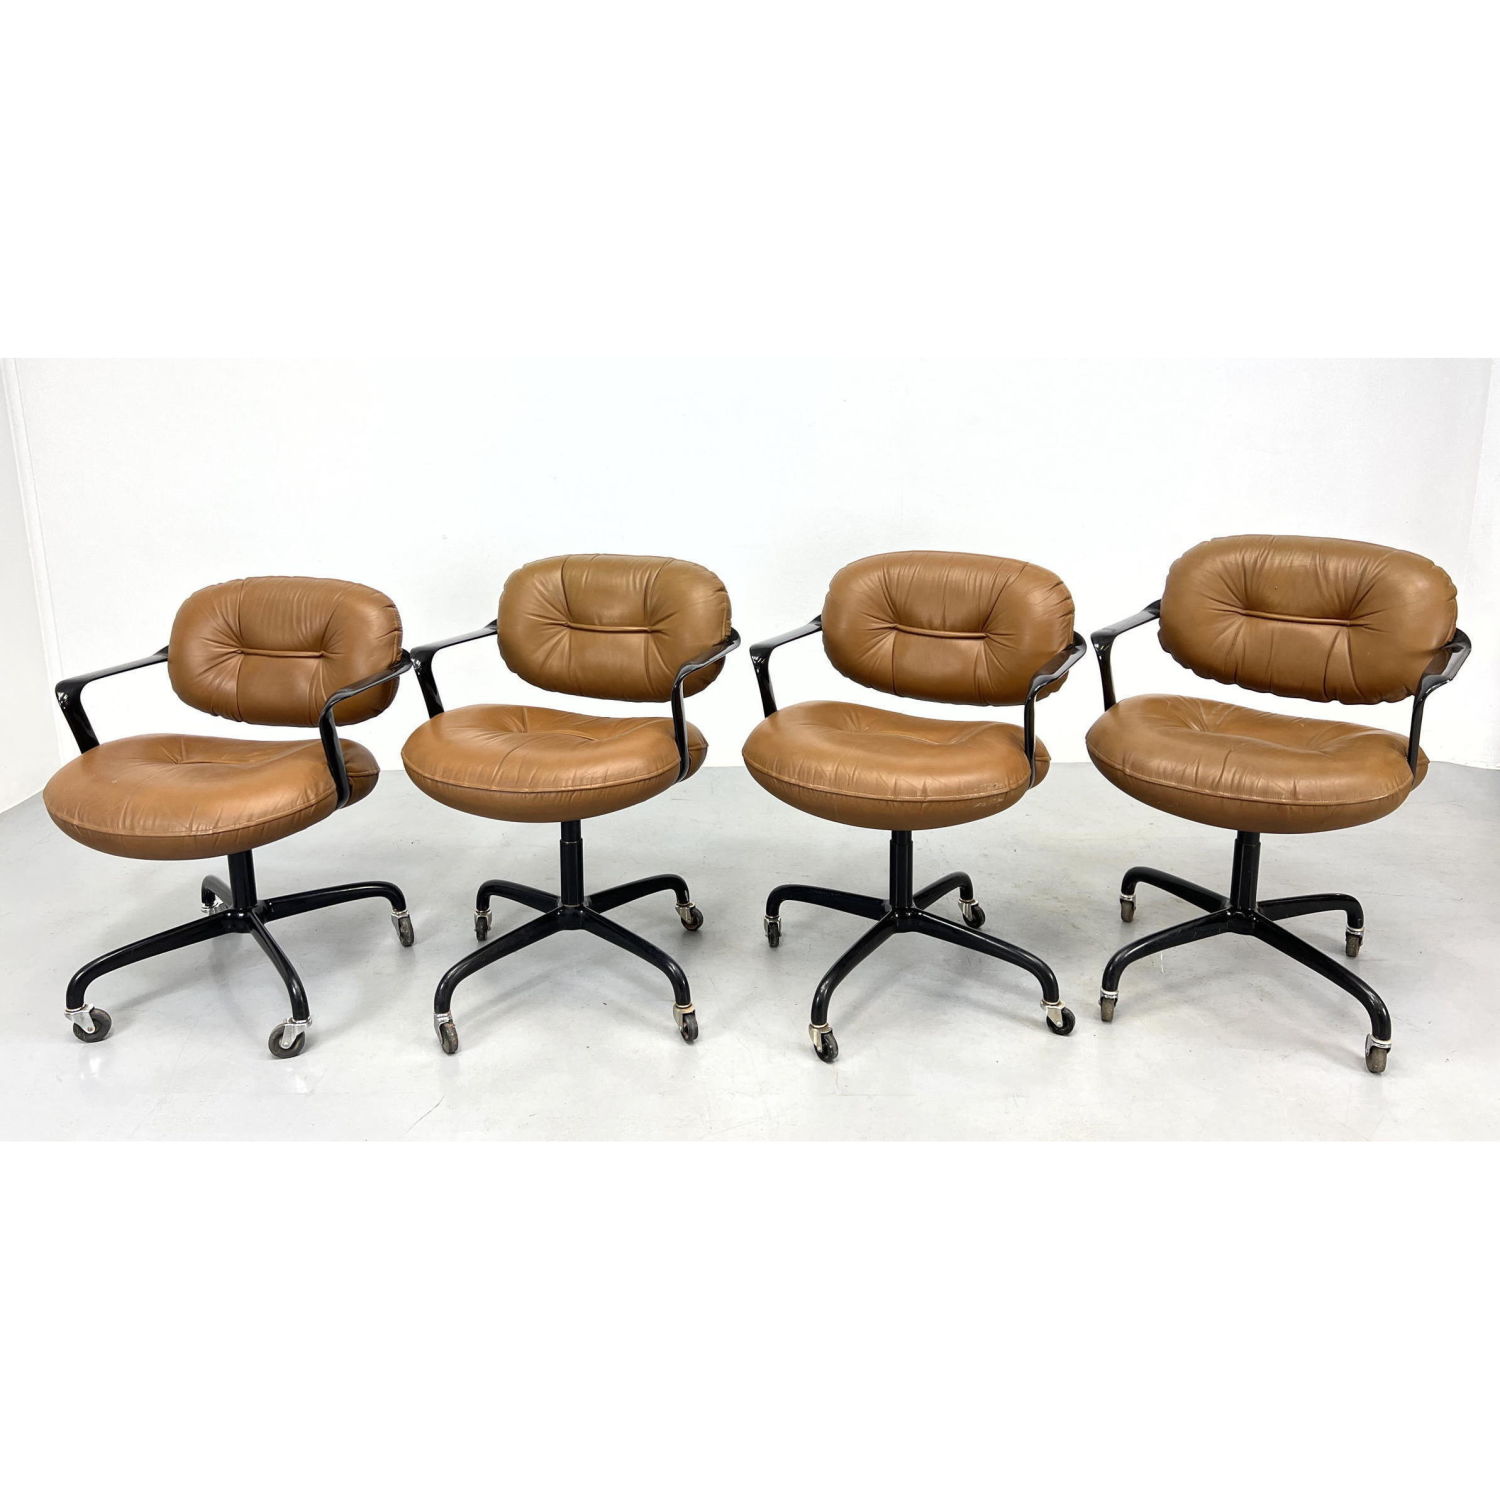 Set 4 Knoll Leather Swivel Chairs.